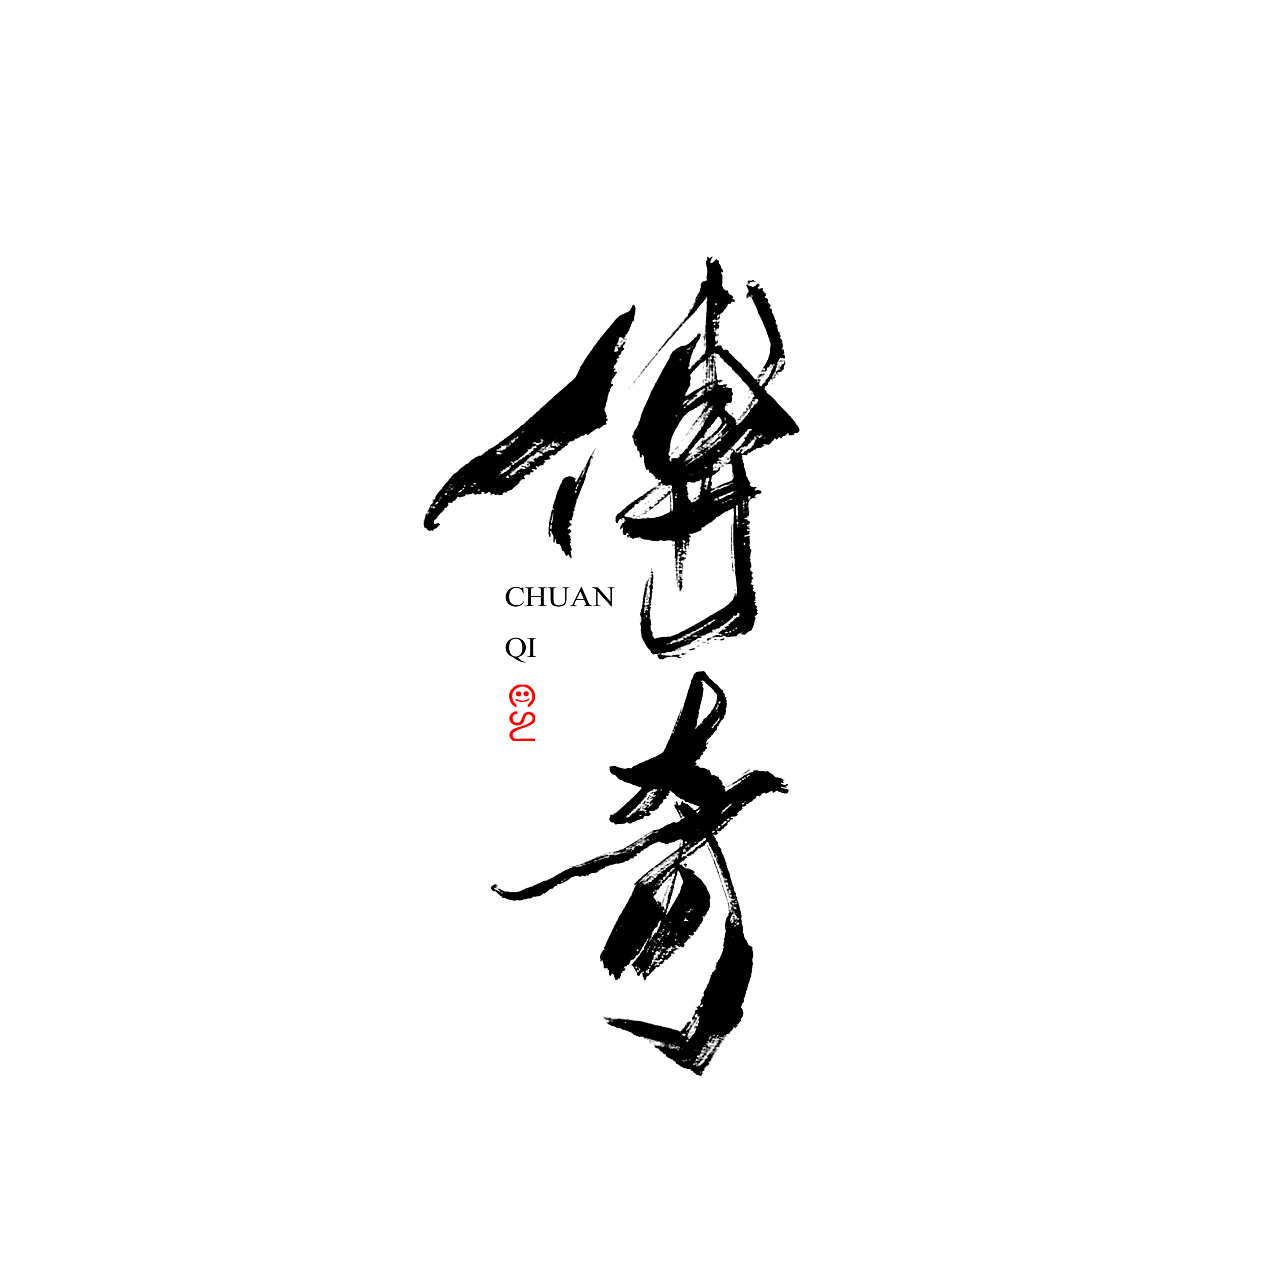 13P Chinese traditional brush font writing practice